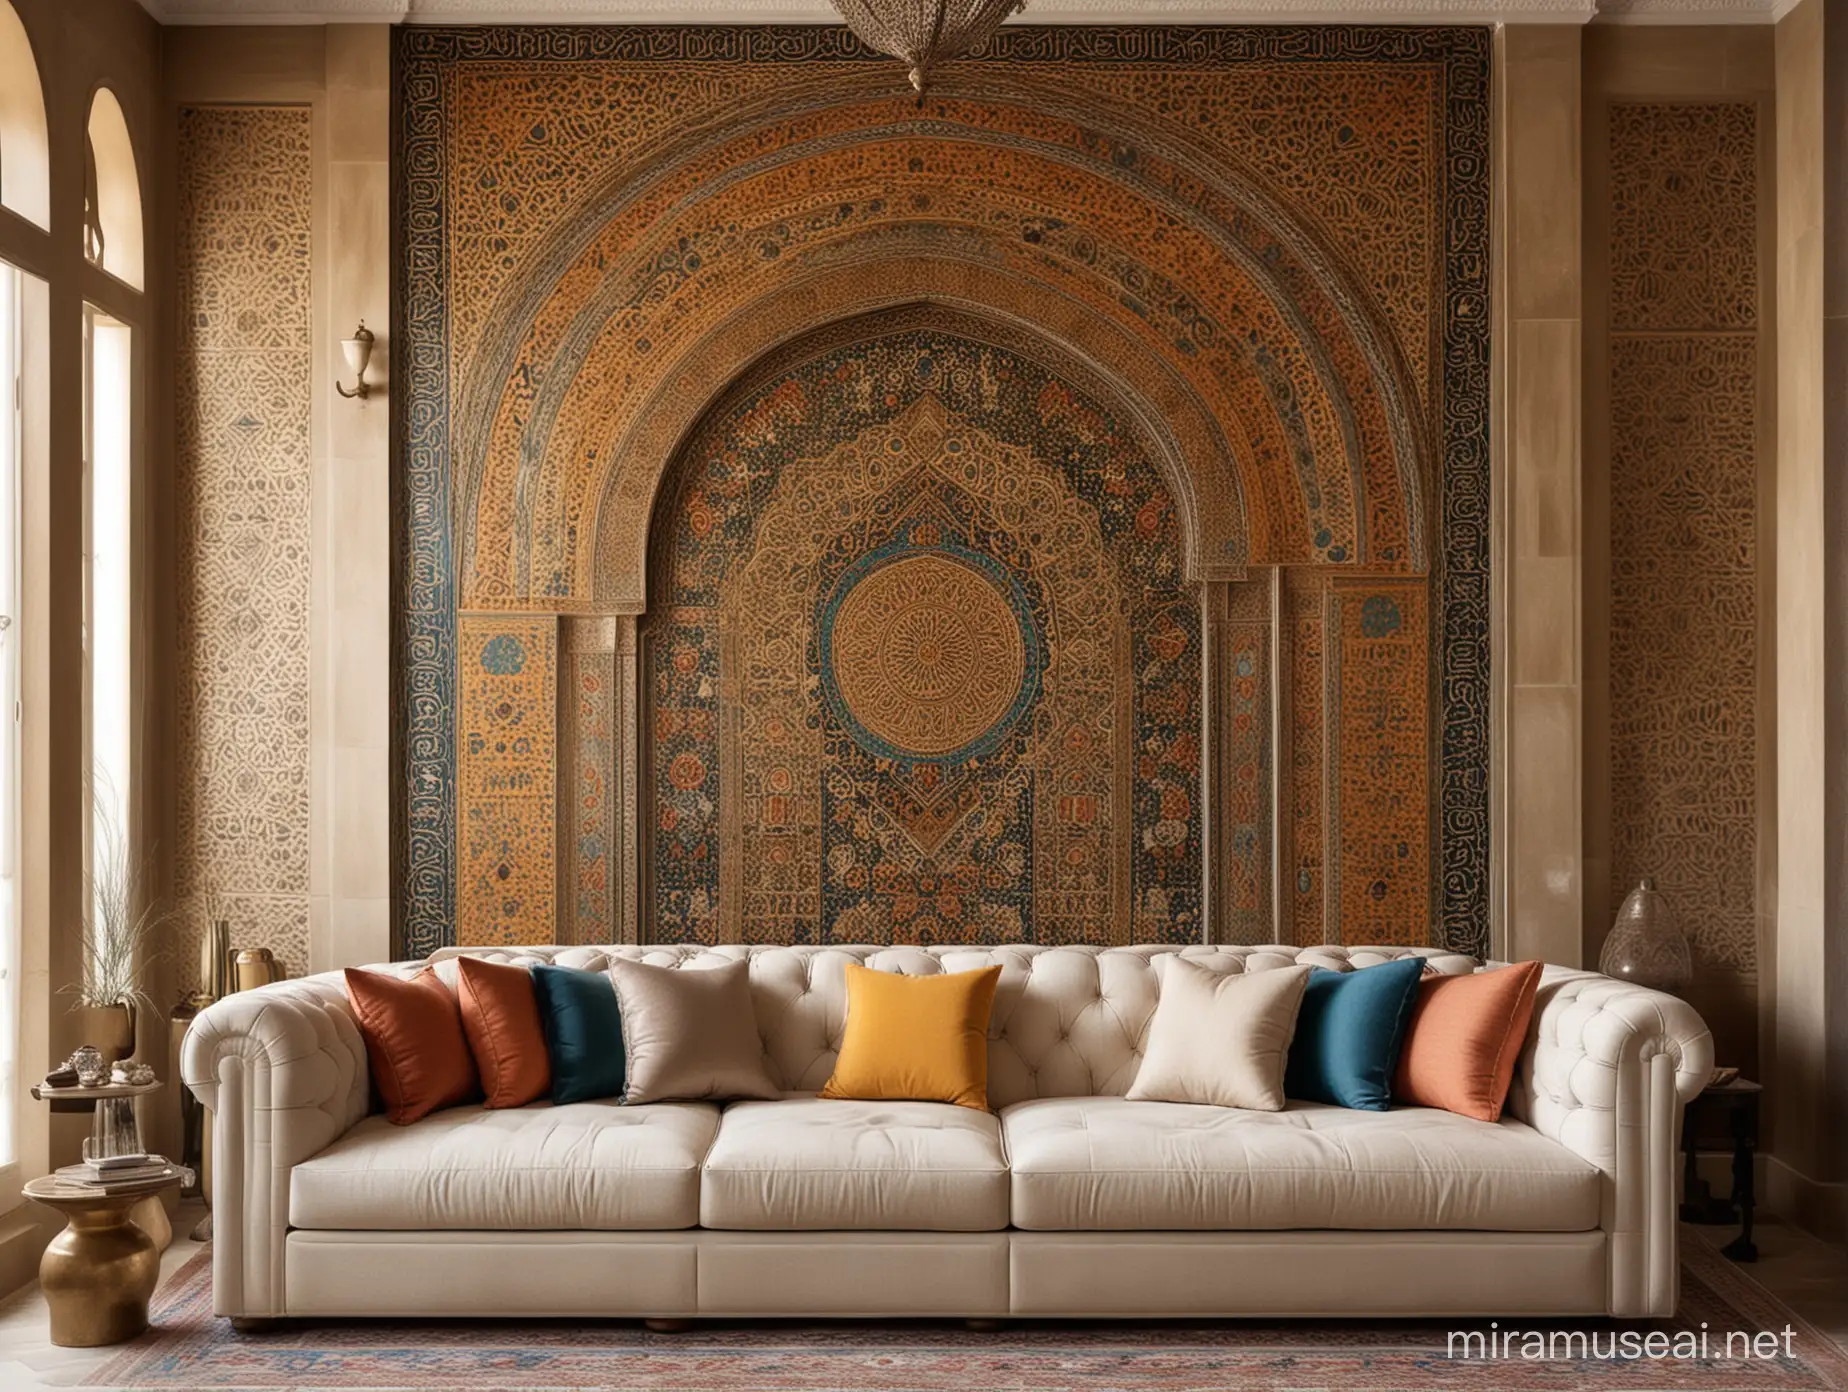 The wall of a home is adorned with a beautiful blend of Folkloric Arabian art, contemporary Egyptian art, and subtle Islamic ornaments. This fusion of styles is dominated by the elegant influence of art deco, seamlessly combining Islamic and French cultures. The image, most likely a painting, is a visually stunning masterpiece that exudes sophistication and cultural richness. Every detail is meticulously crafted, showcasing a perfect harmony of intricate designs and luxurious aesthetics. The high quality of the image is evident in the exquisite colors, fine details, and overall sense of opulence that it exudes.